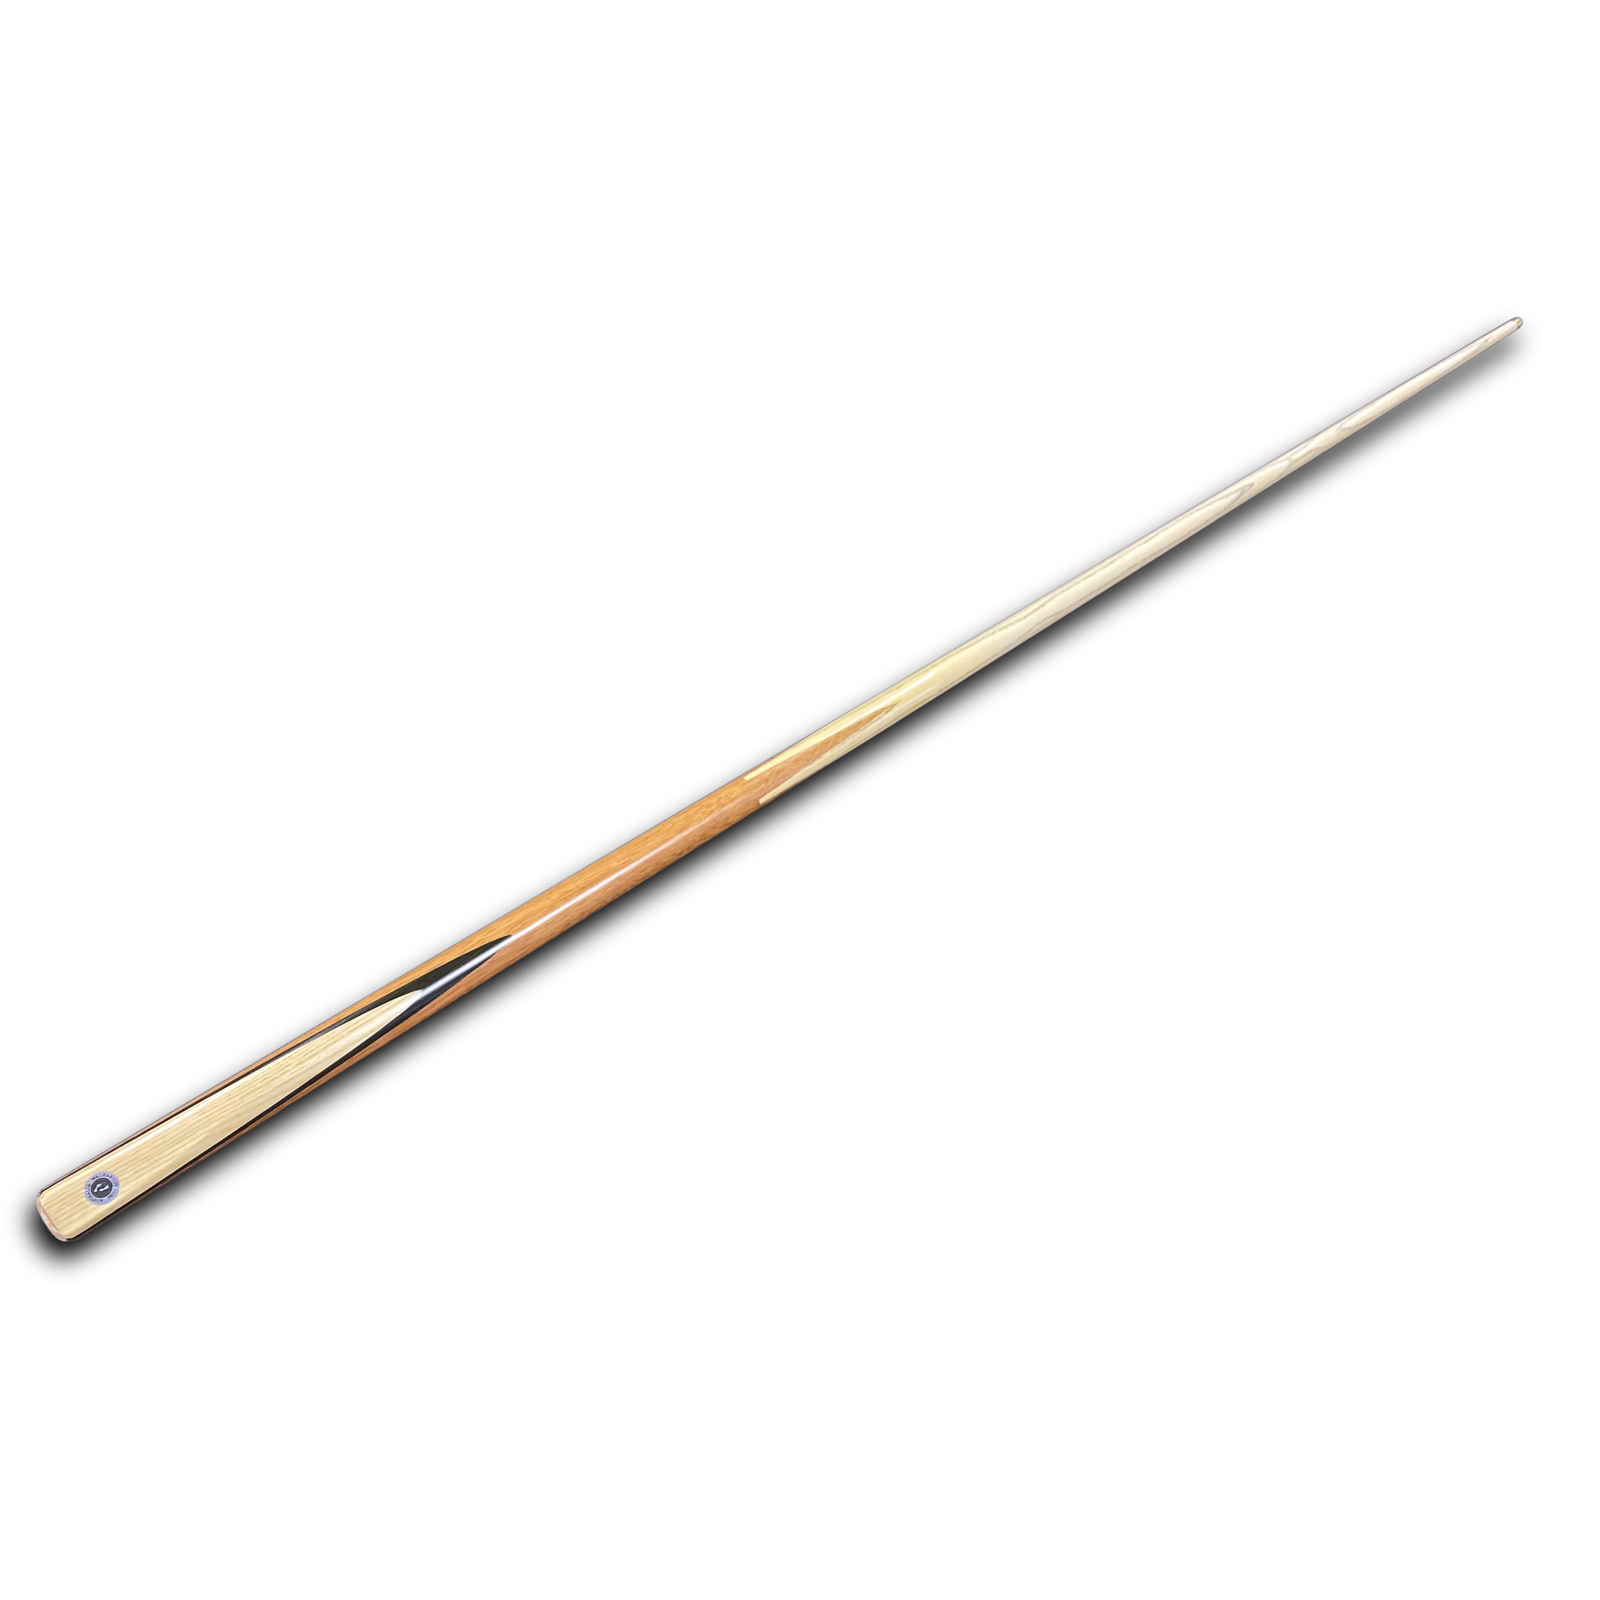 E.V. 57 inch 1pc Hardwood with composite Blackwood splice pool cue